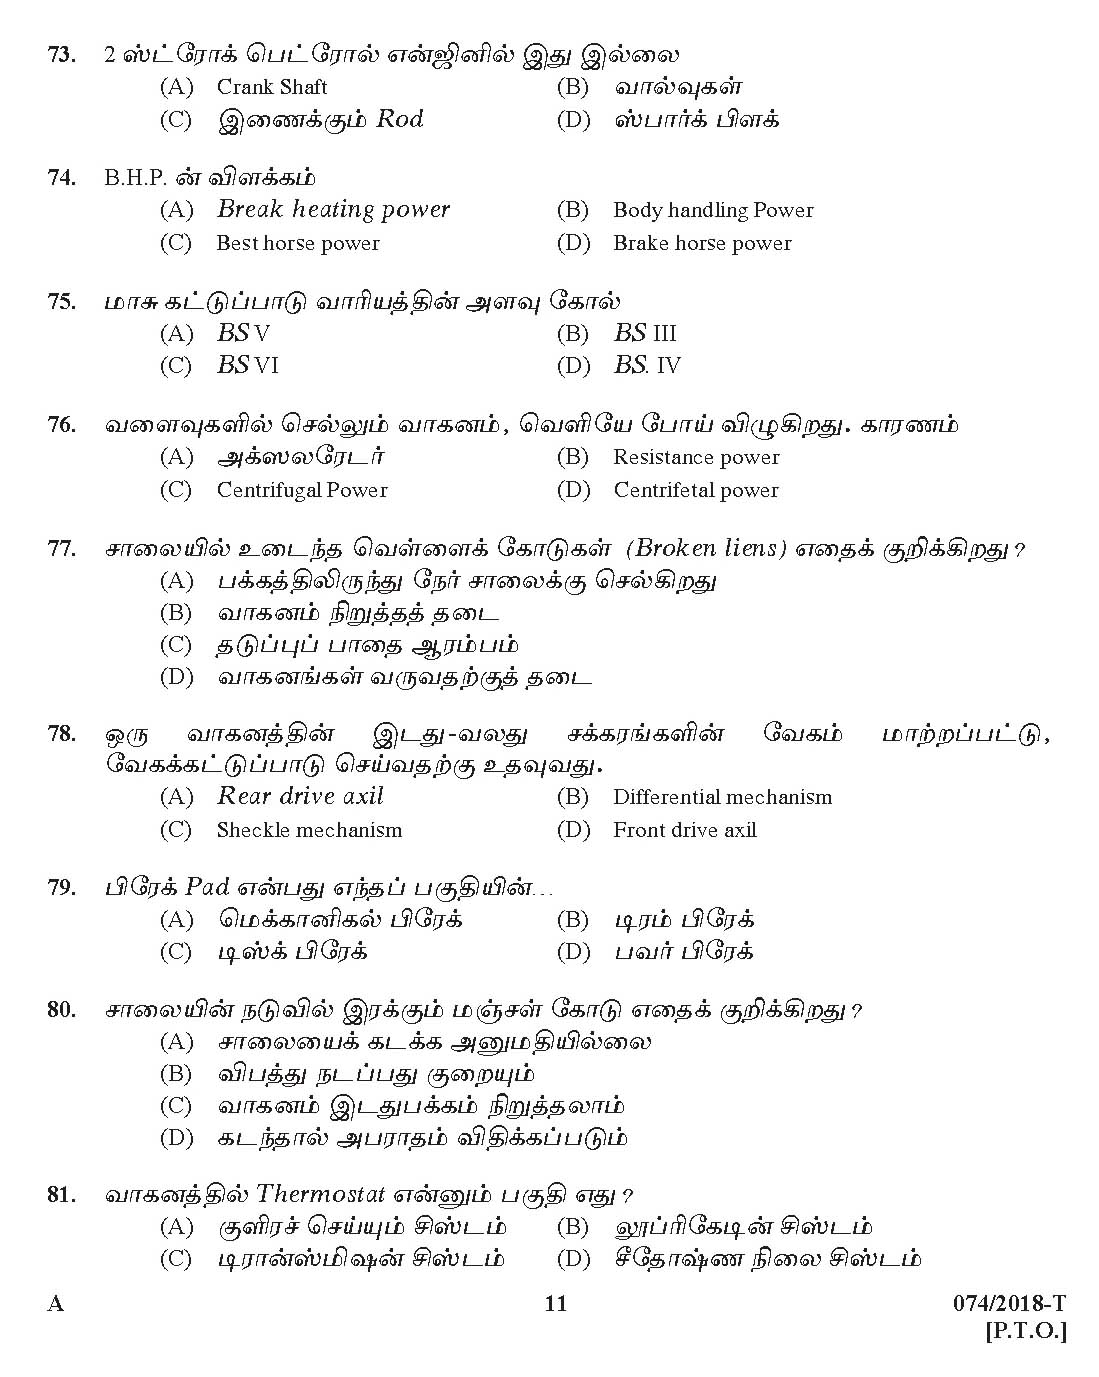 Kerala PSC Police Constable Driver Exam 2018 Question Paper Code 0742018 T 10